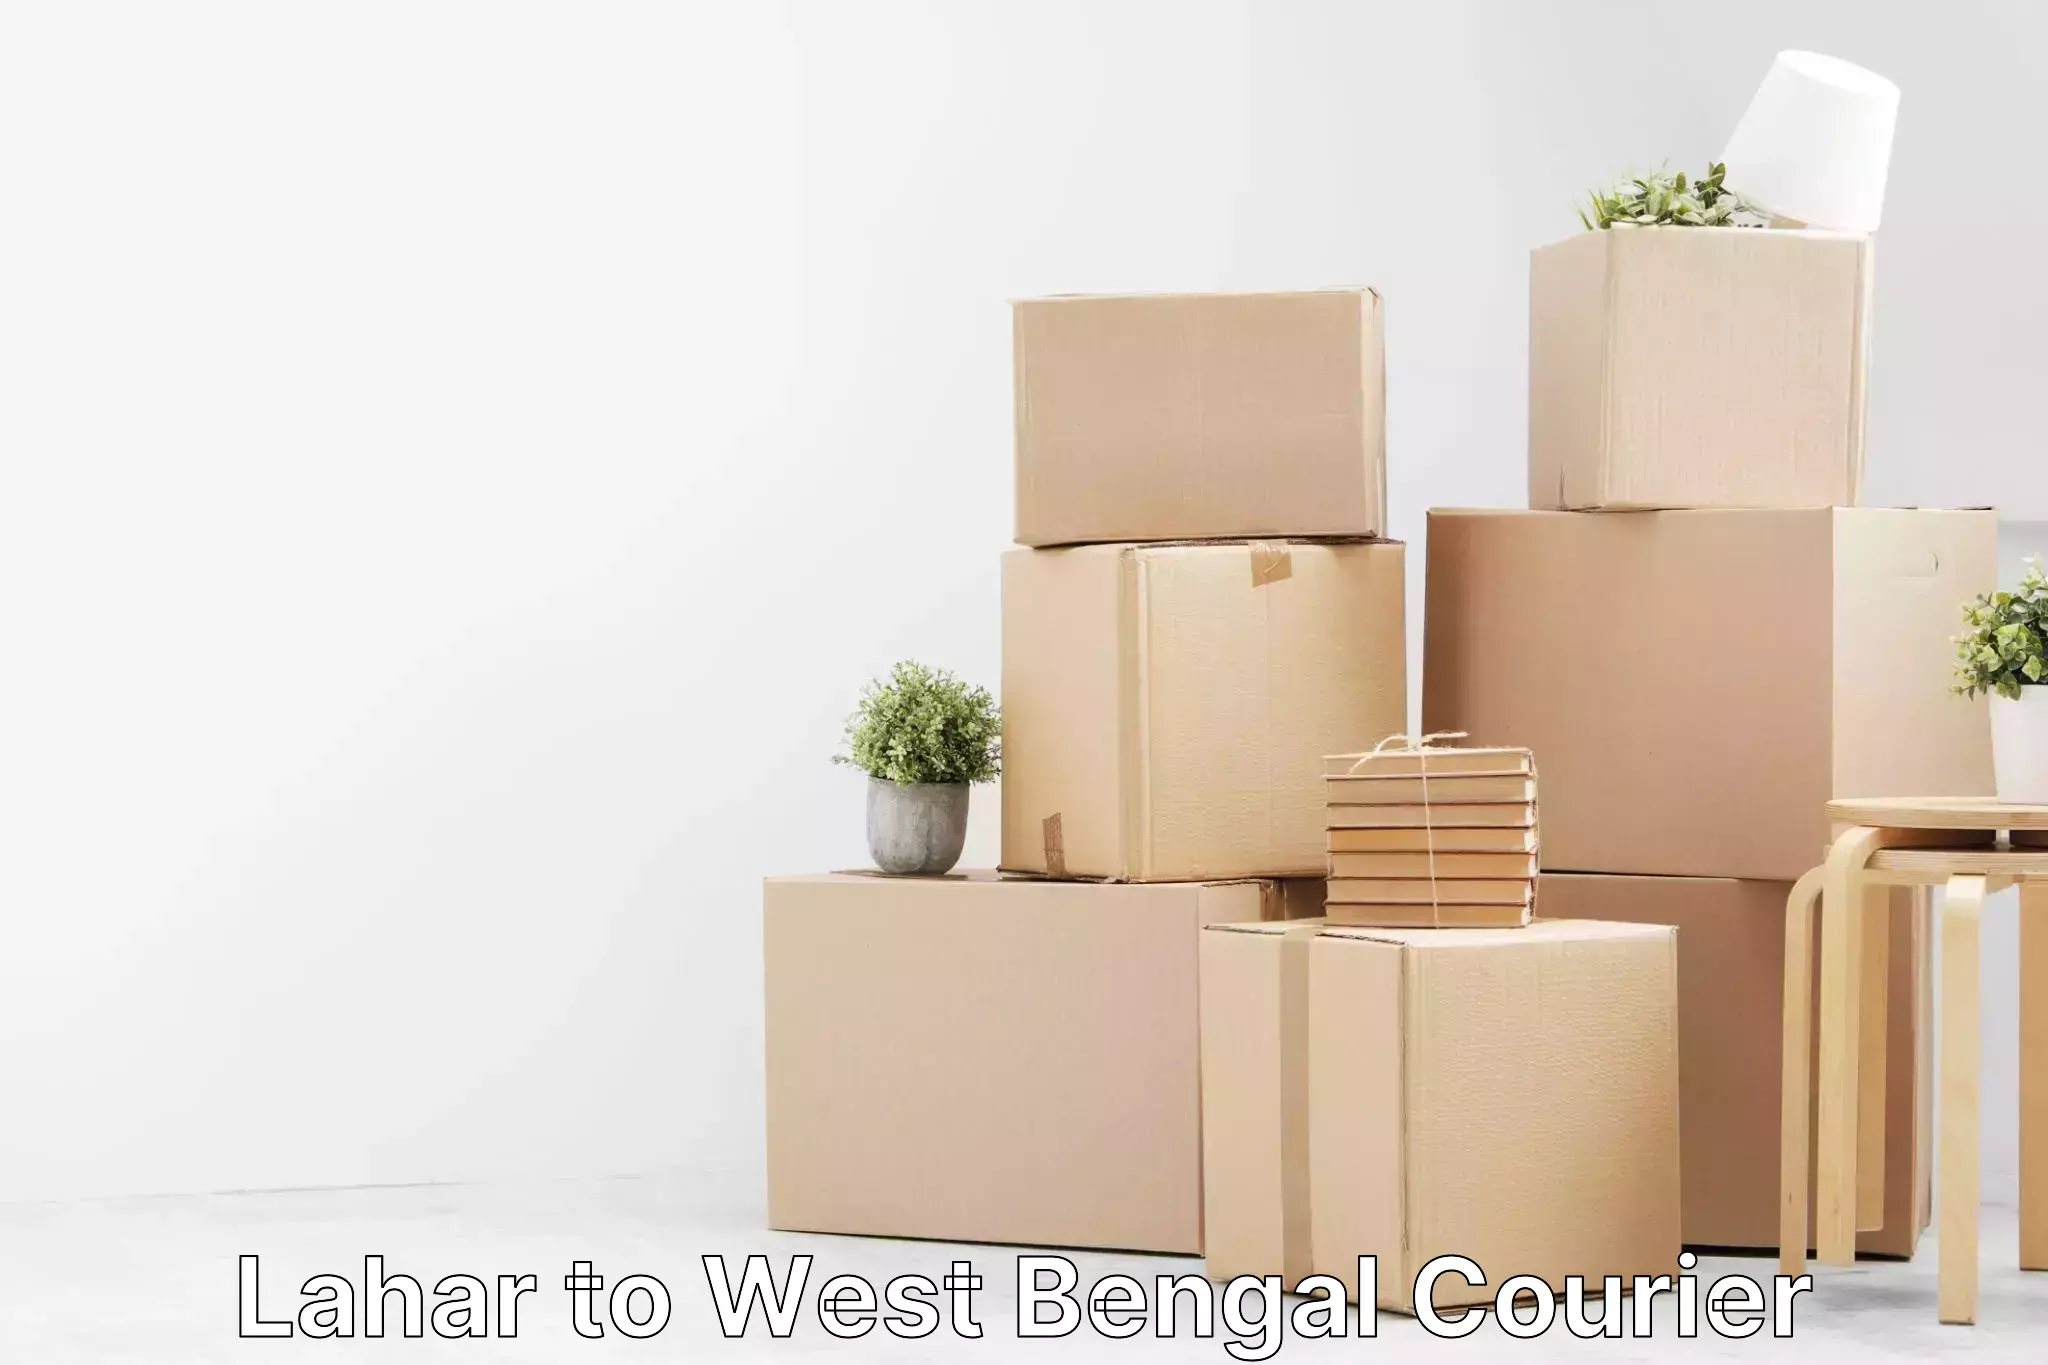 Custom courier packaging Lahar to West Bengal